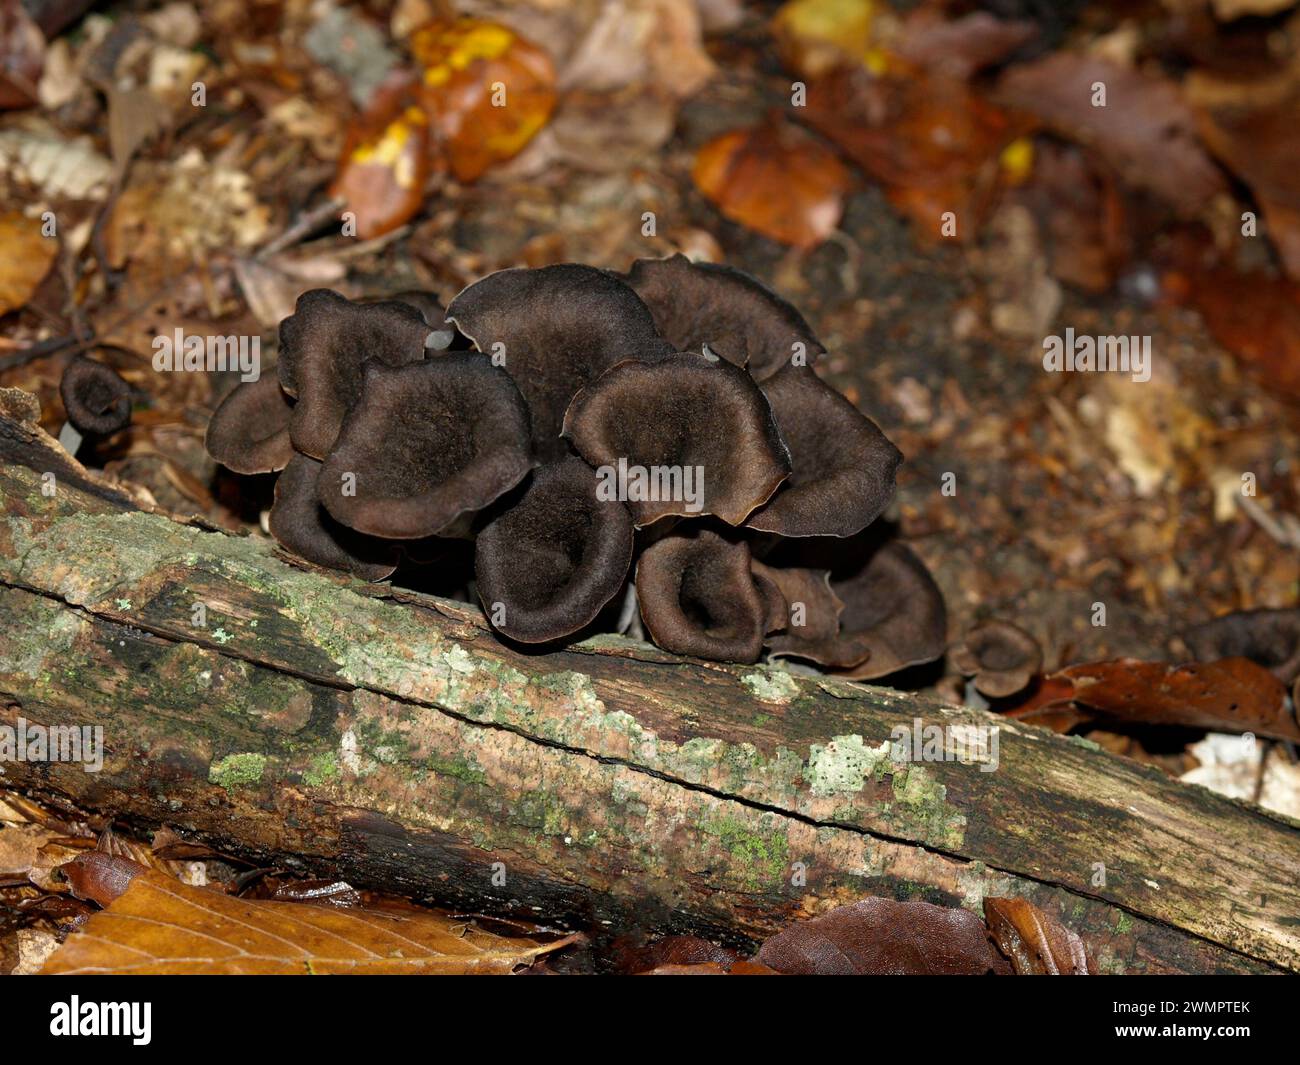 Craterellus cornucopioides - Black trumpet in the wood near rotten branch. Good natural forest food. Mushroom in Croatia. Salutary. Stock Photo